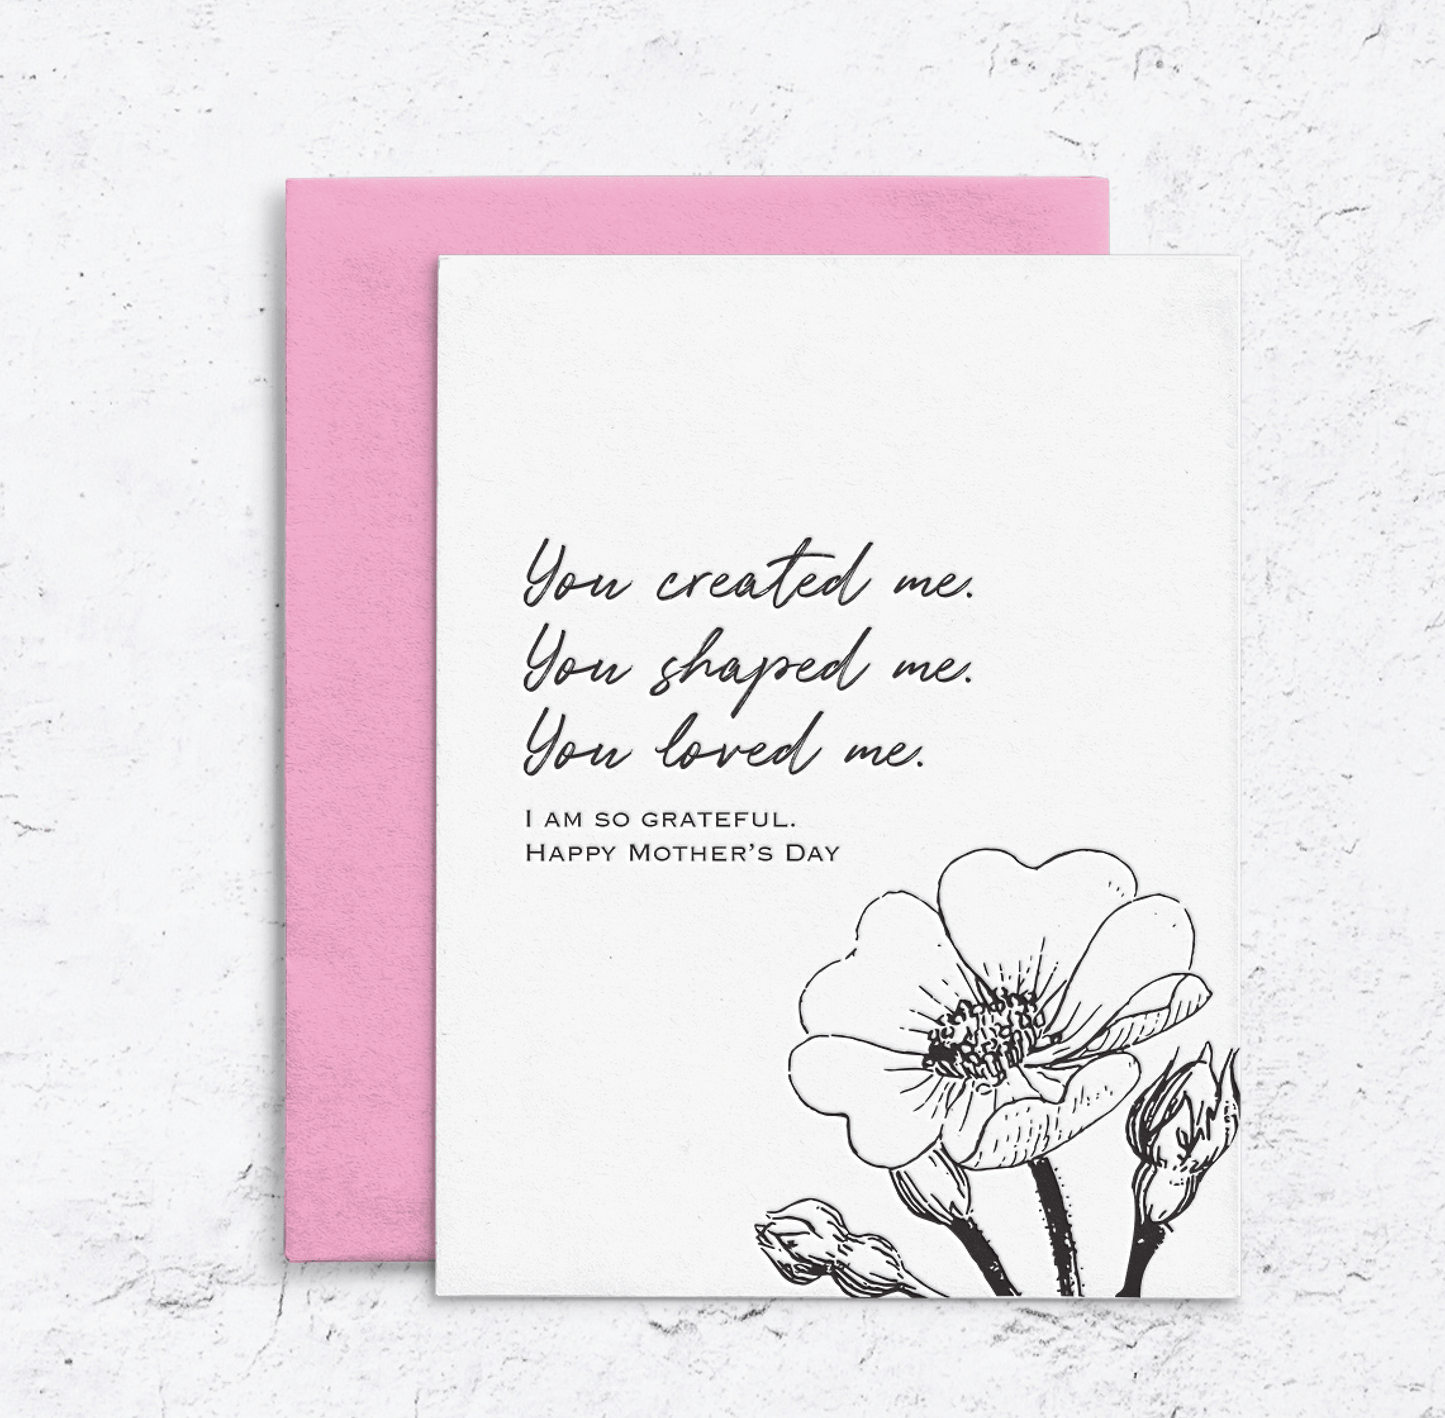 Mother's Day Shaped Me Letterpress Card